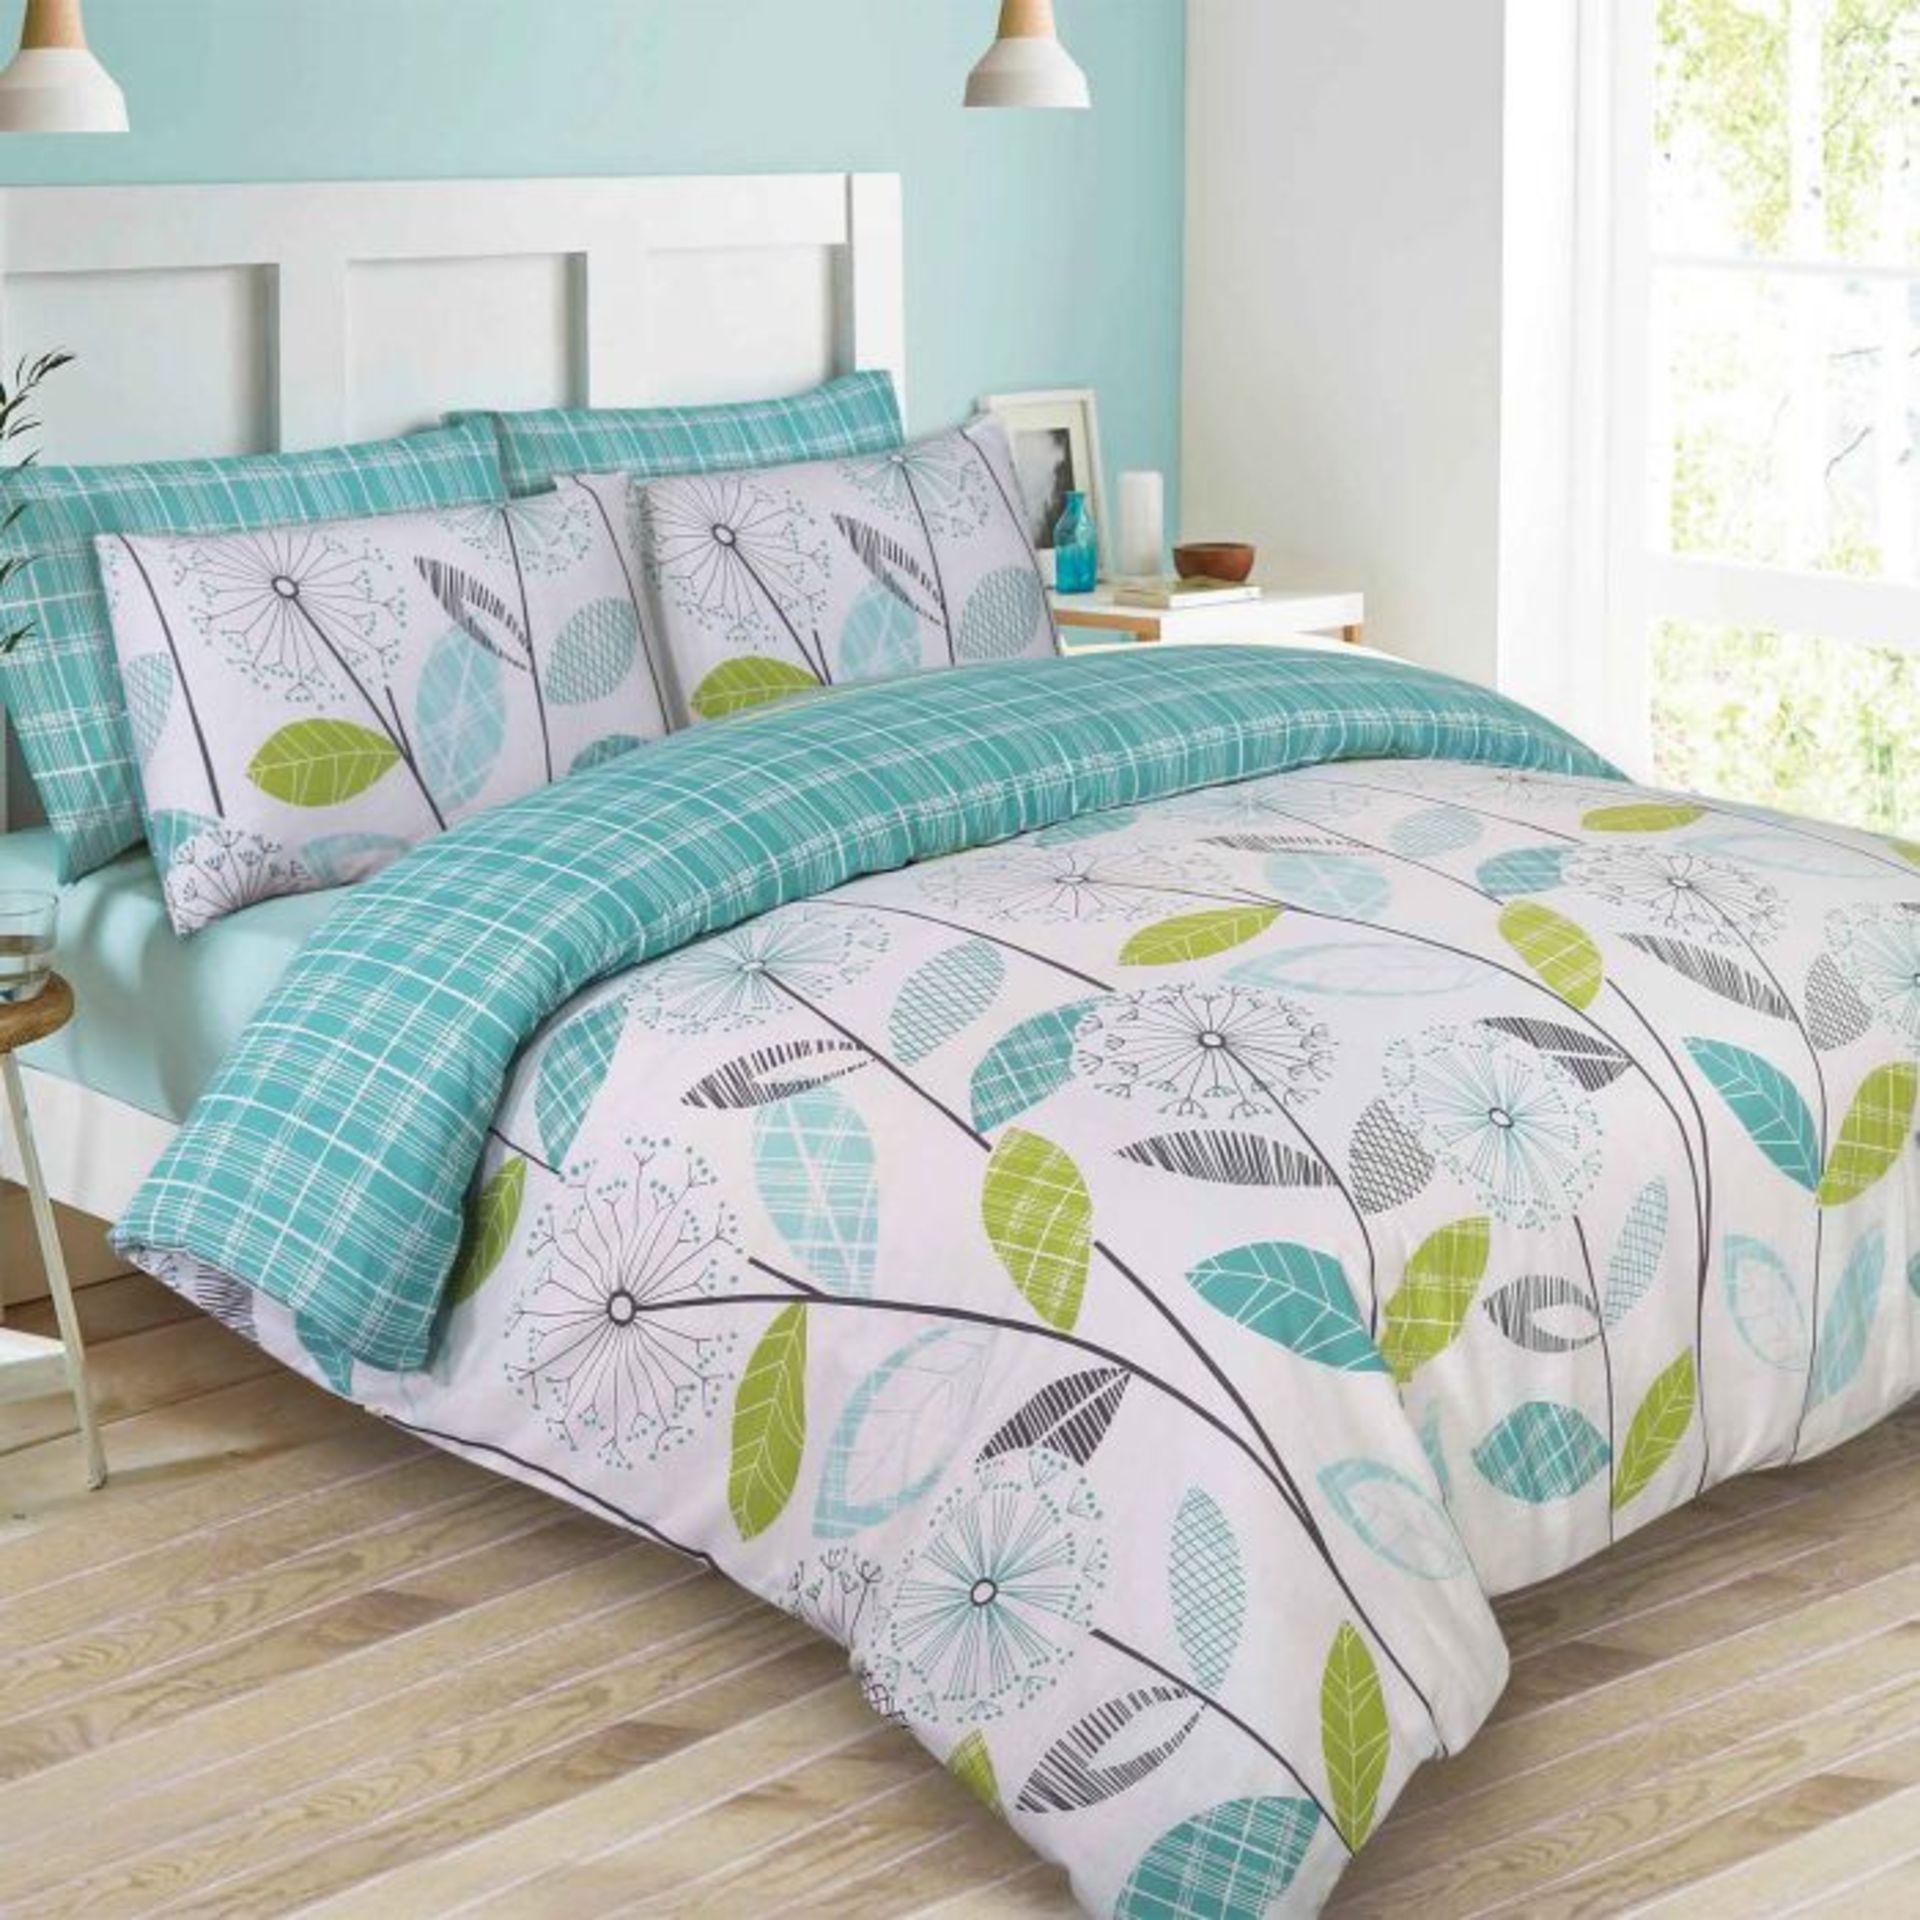 BAGGED DREAMSCAPE CAROLOS DUVET COVER SET DOUBLE RRP £34.99 (AS SEEN IN WAYFAIR)Condition